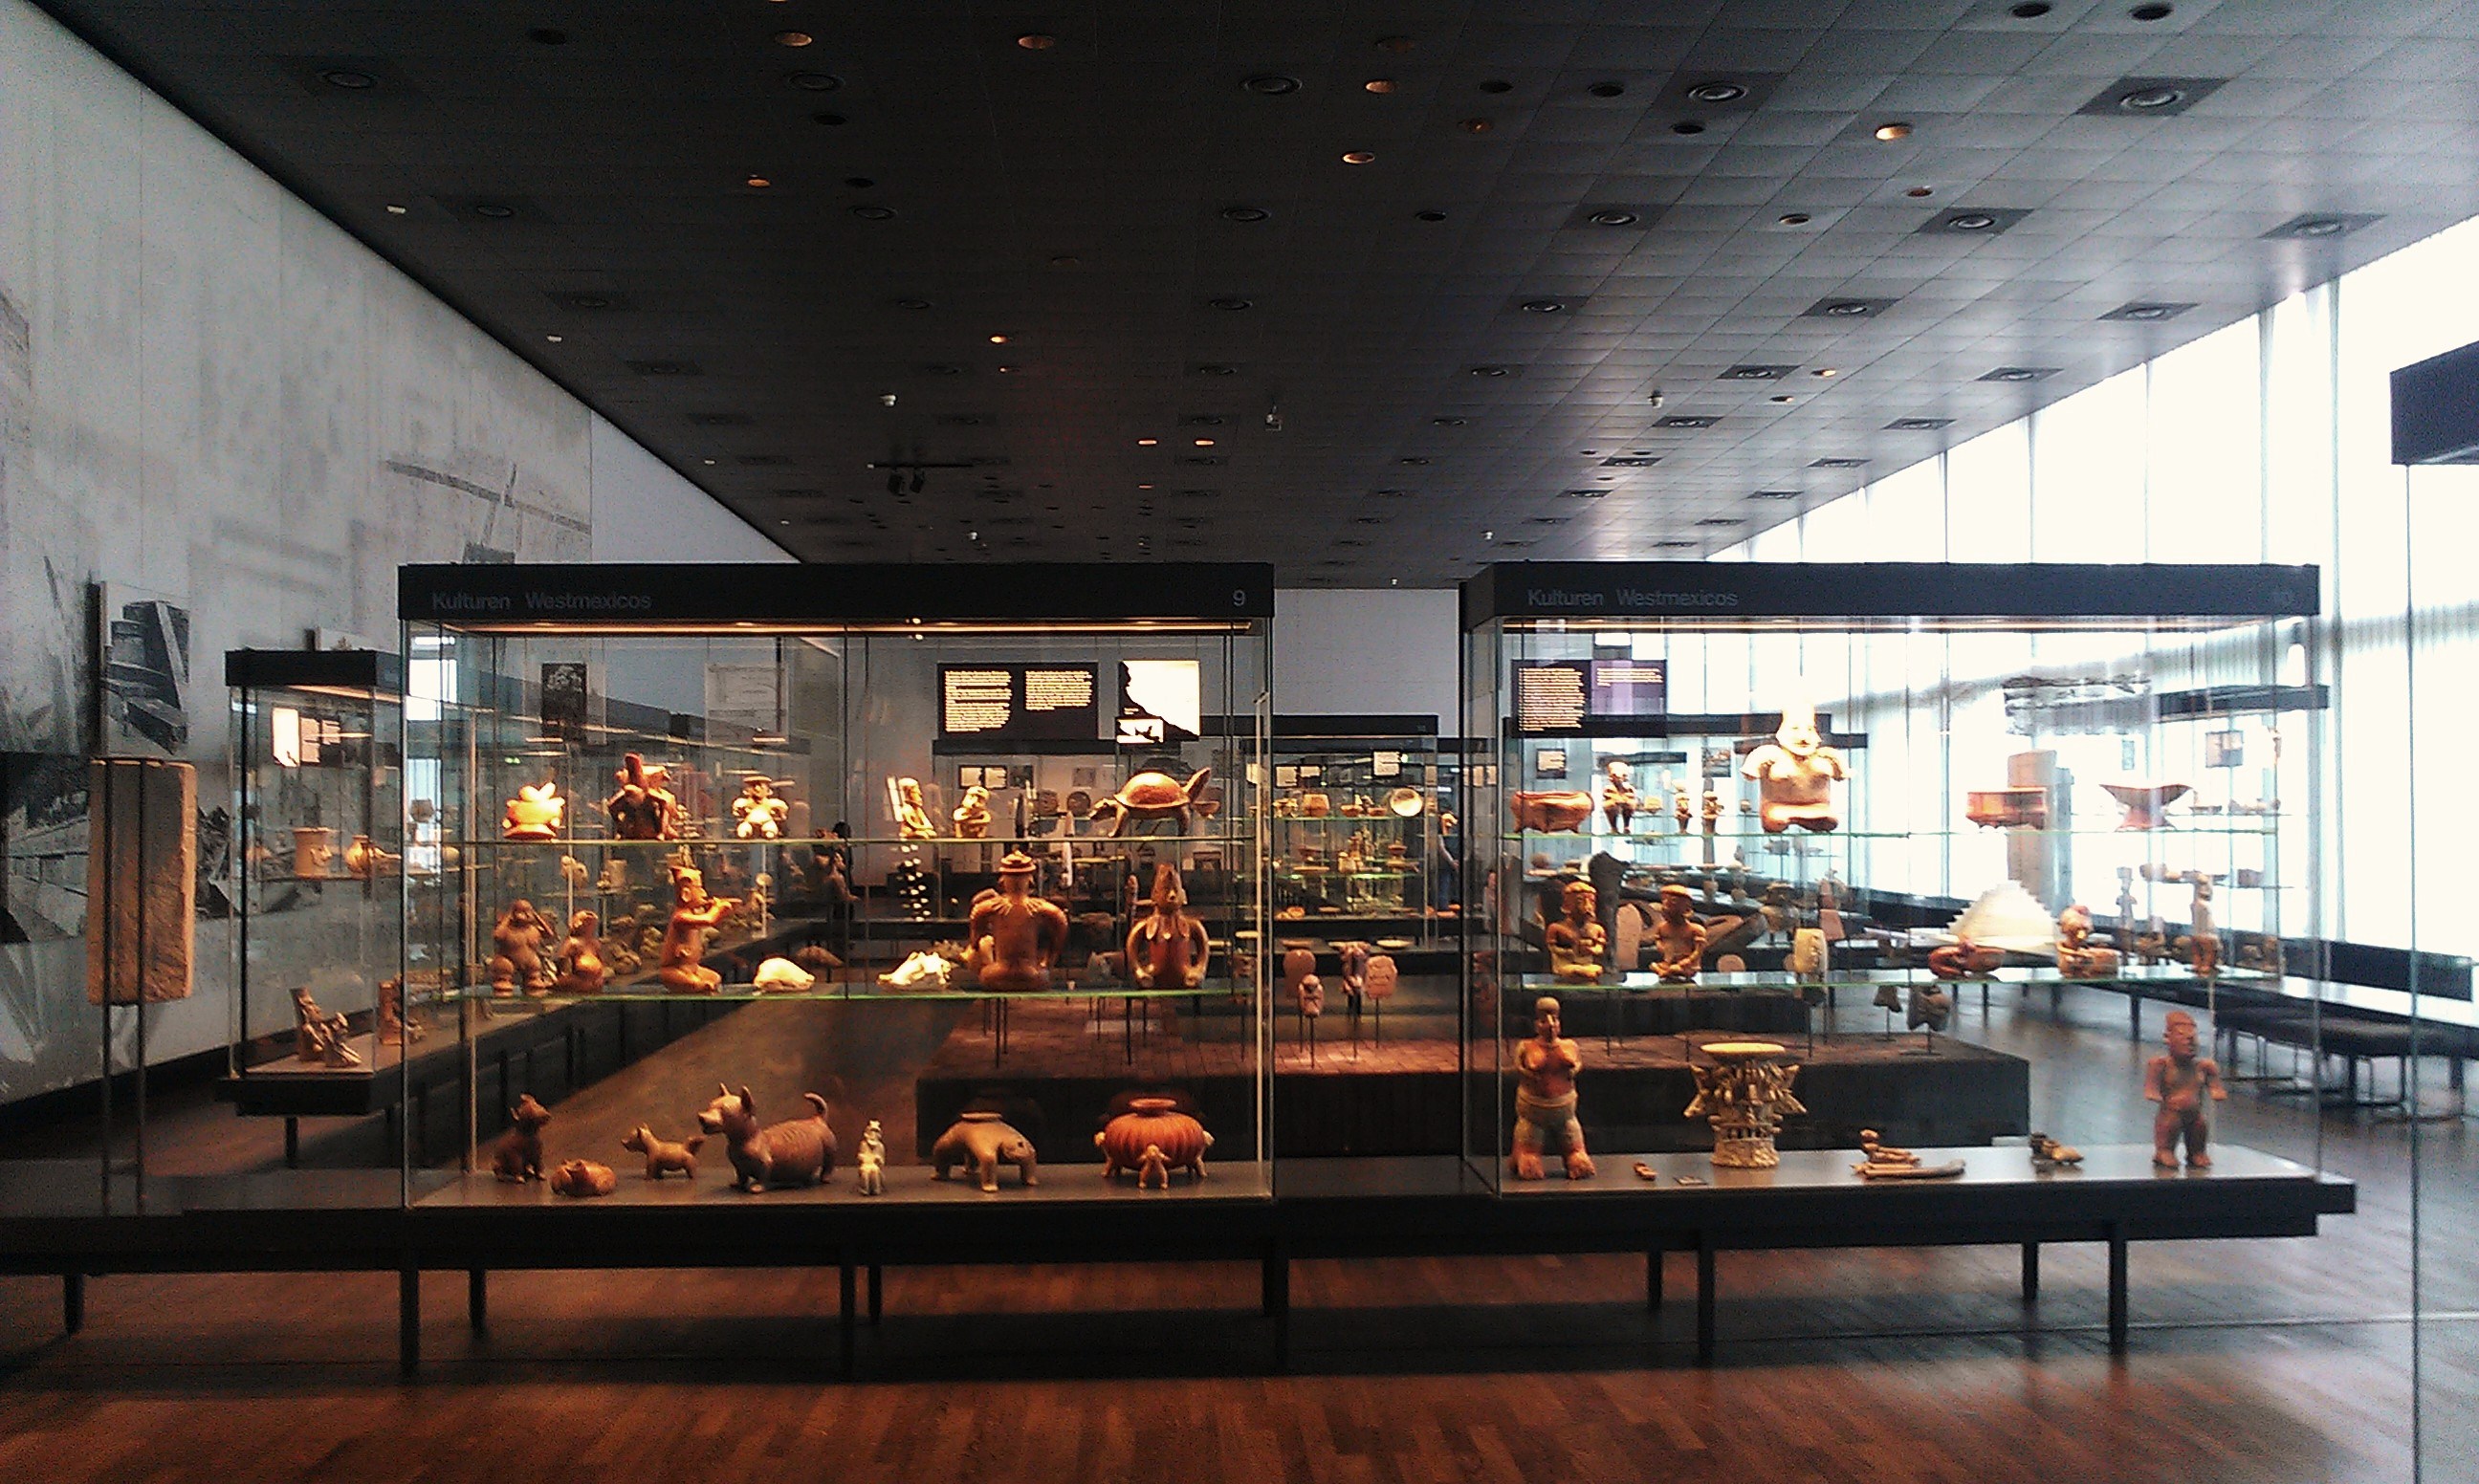 A gallery featuring Mesoamerican artifacts at the former Ethnological Museum of Berlin.